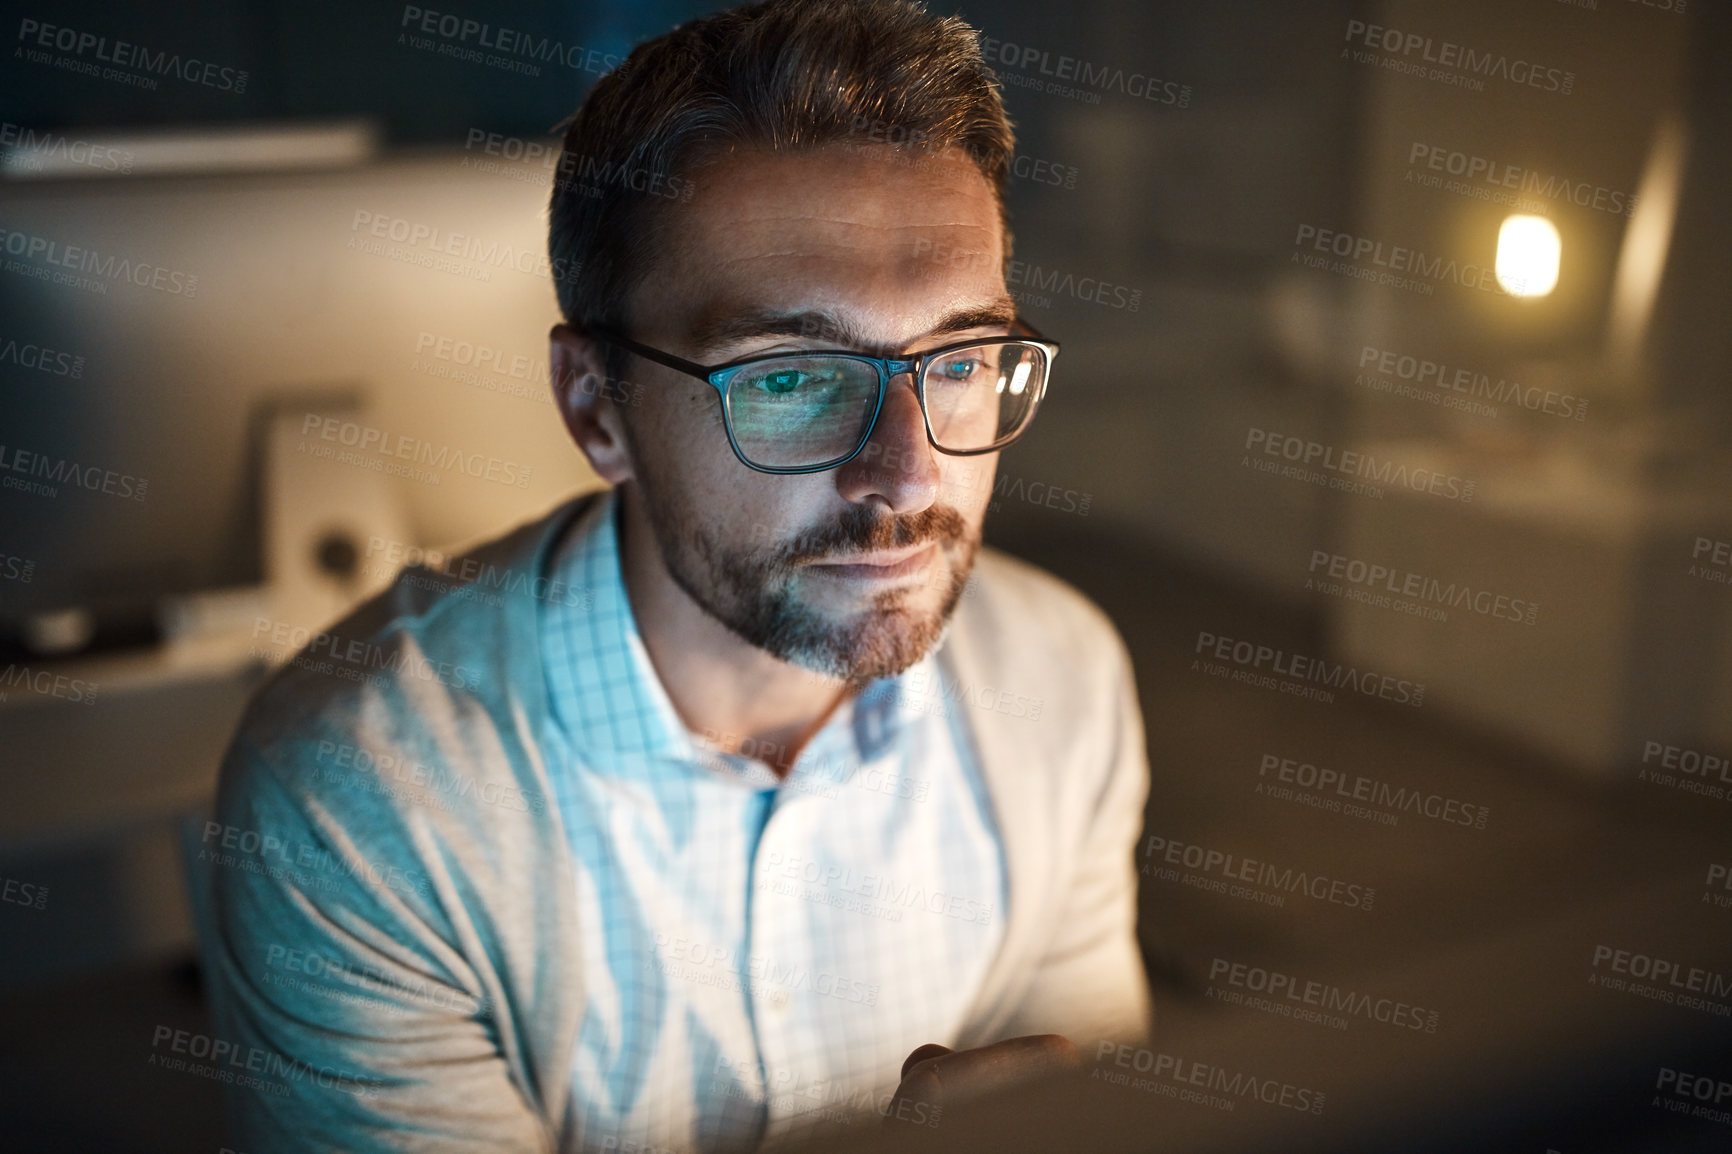 Buy stock photo Shot of a mature businessman working late on a computer in an office